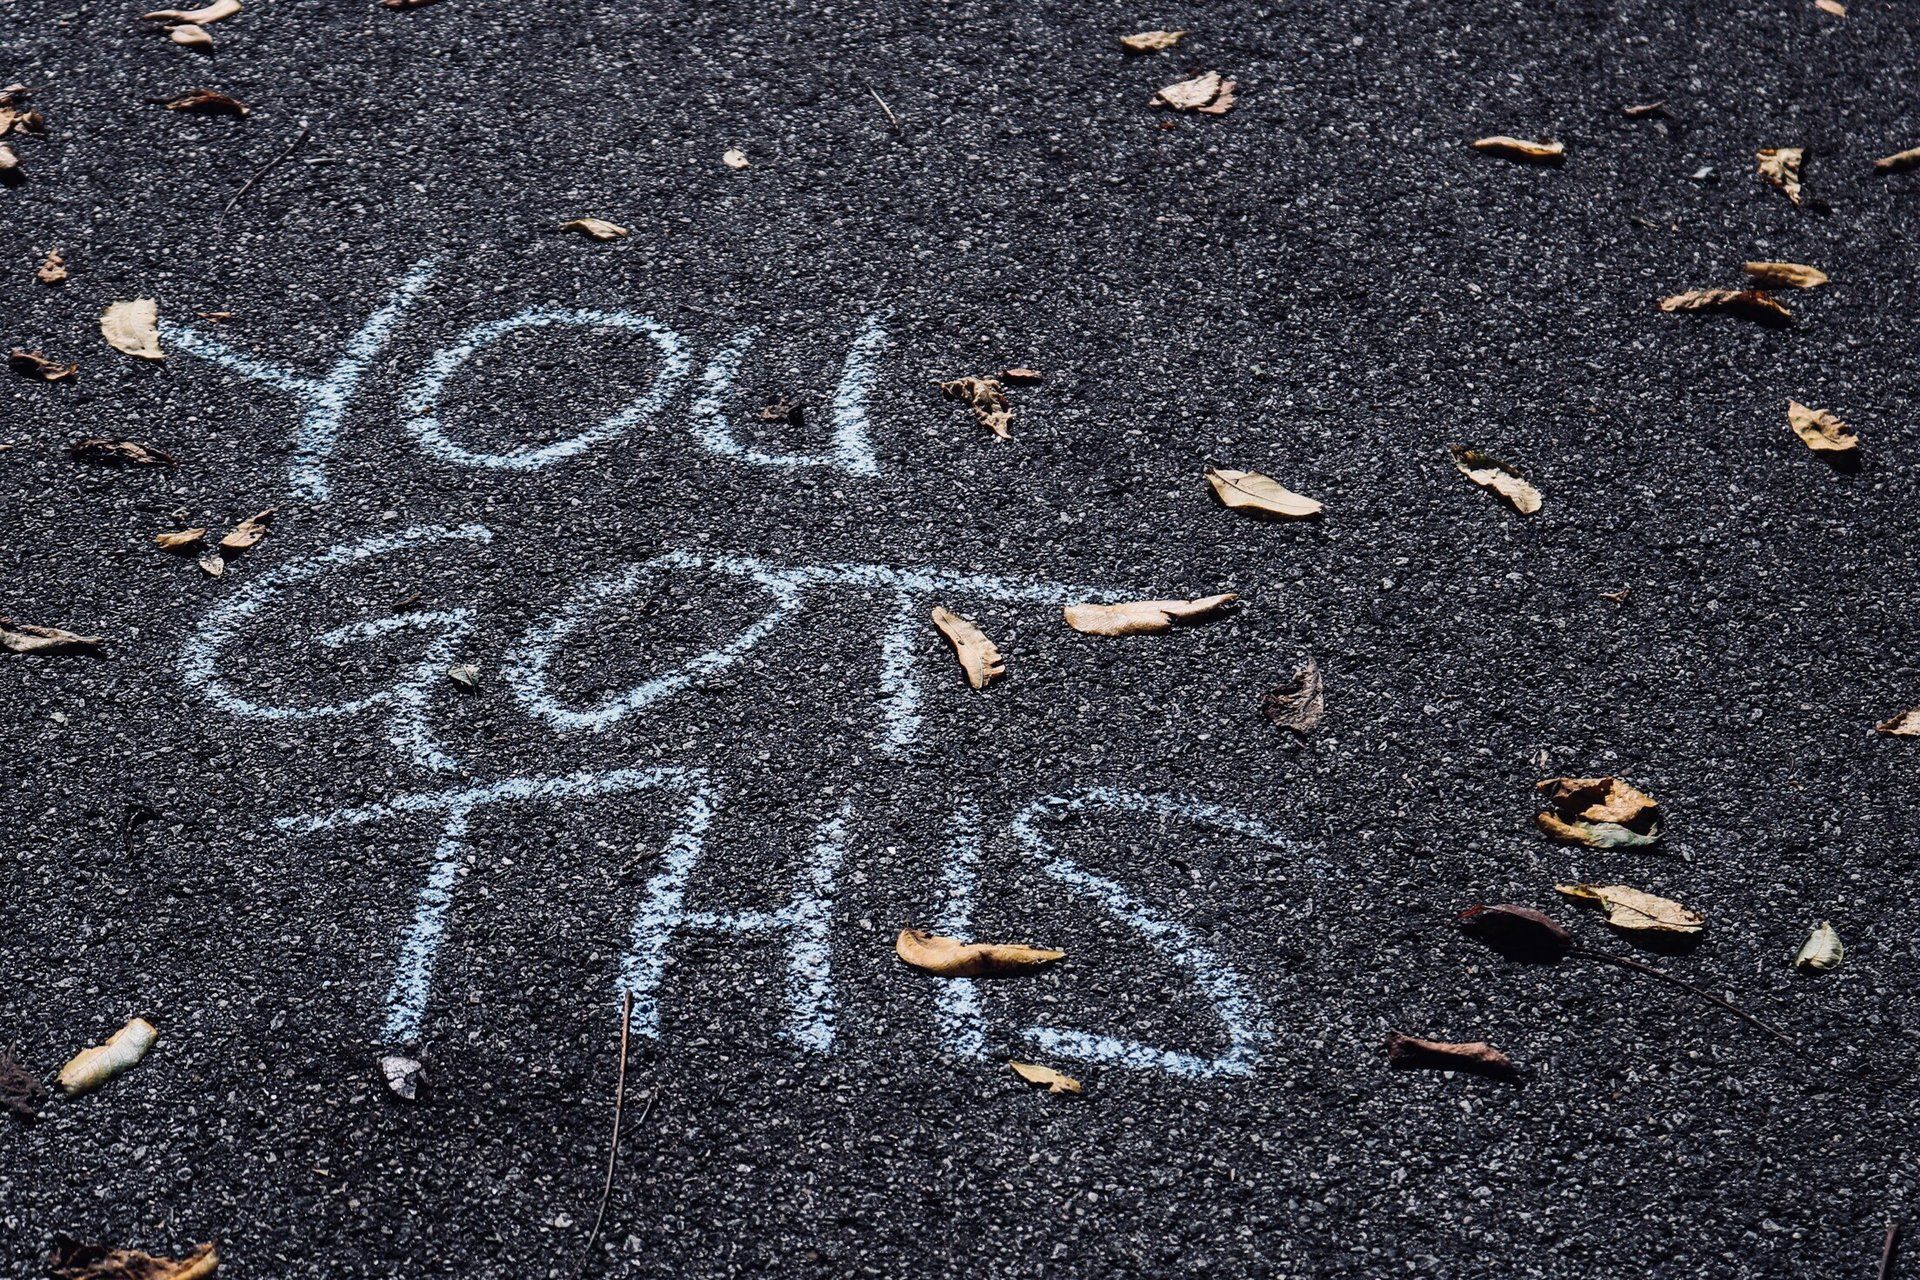 the words `` you got this '' are written in chalk on the ground .